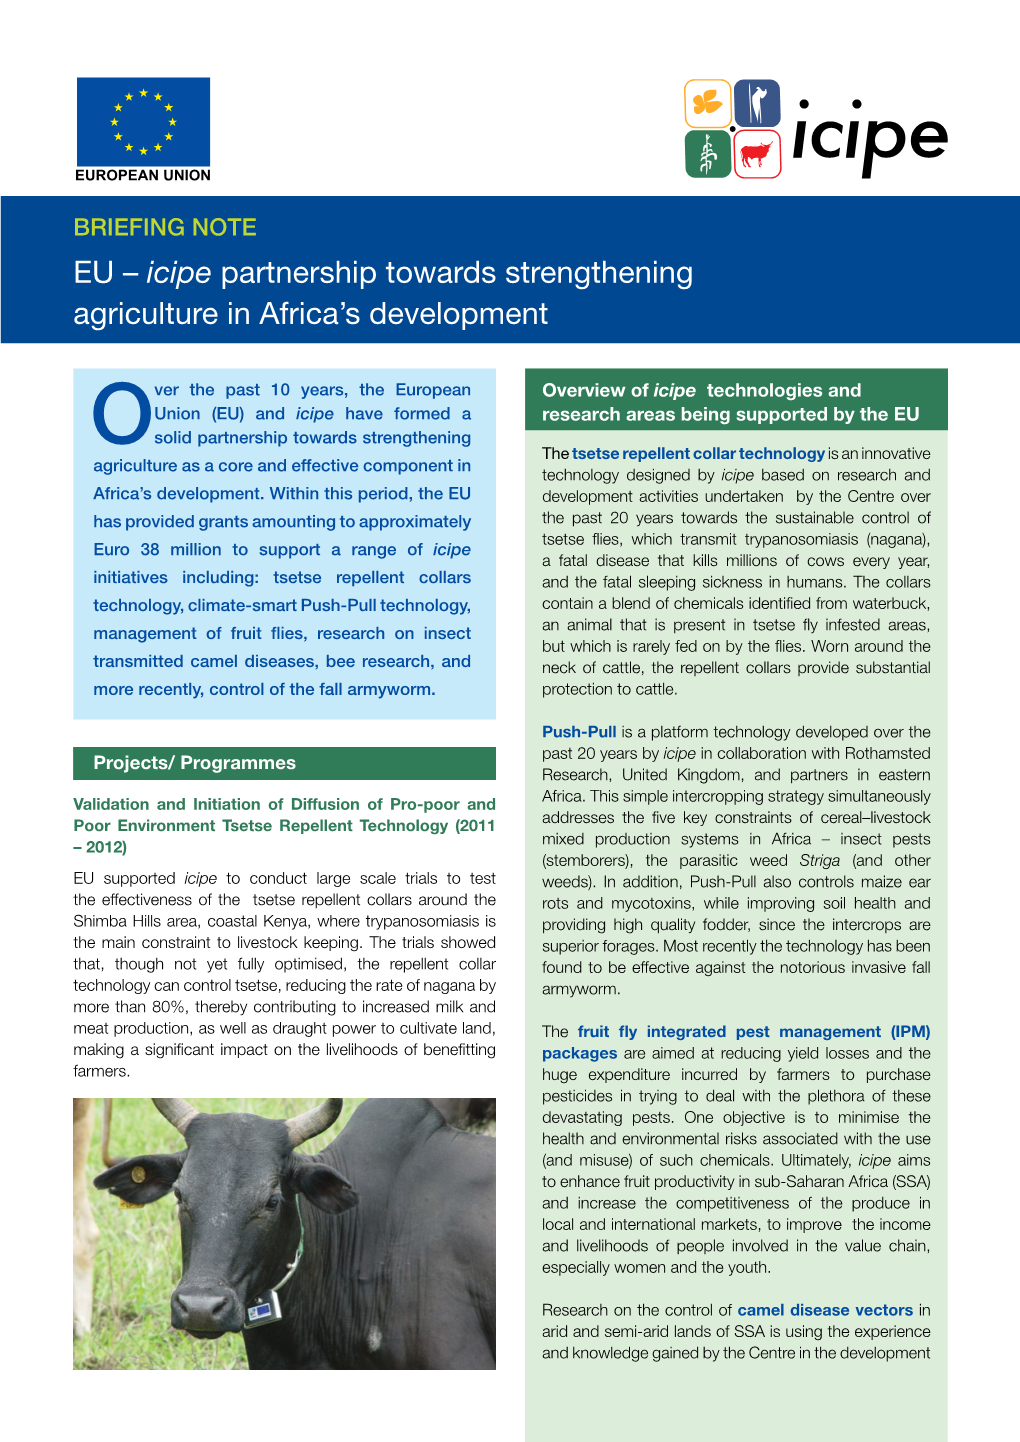 EU – Icipe Partnership Towards Strengthening Agriculture in Africa's